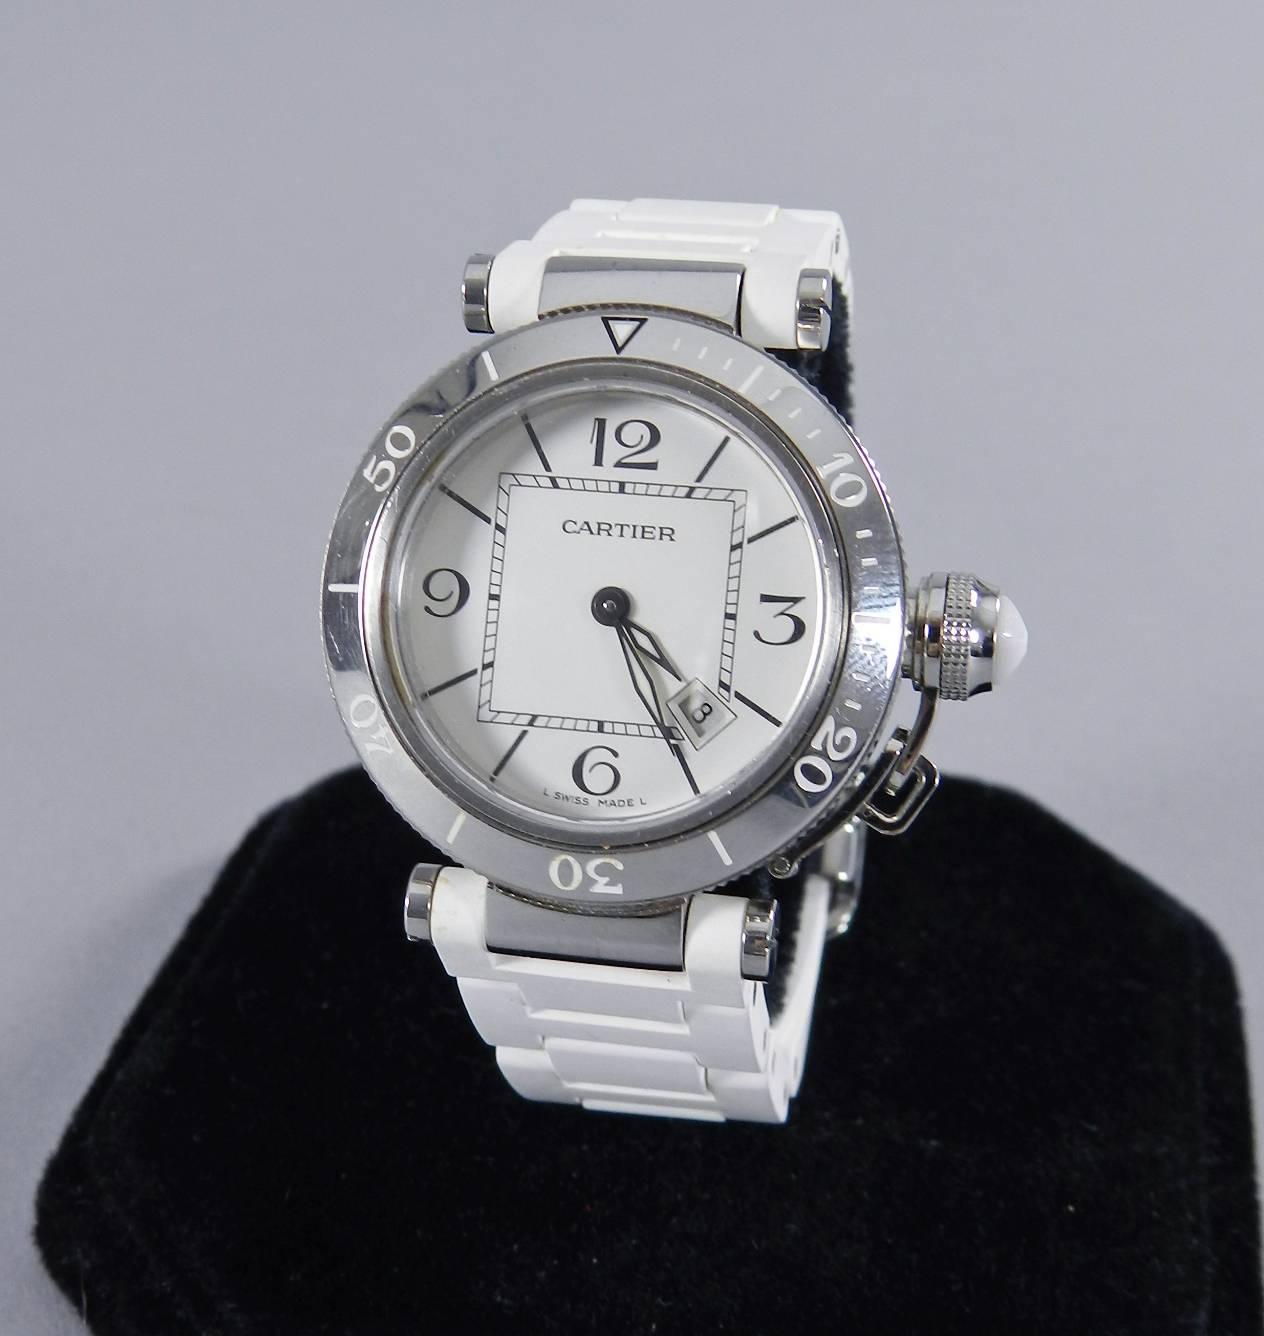 Cartier Pasha Seatimer ladies watch.  33mm face, quartz movement, white rubber band.  Circa 2011.  Excellent pre-owned condition. No original box or papers. Original retail was $4400 USD.

We ship worldwide.
